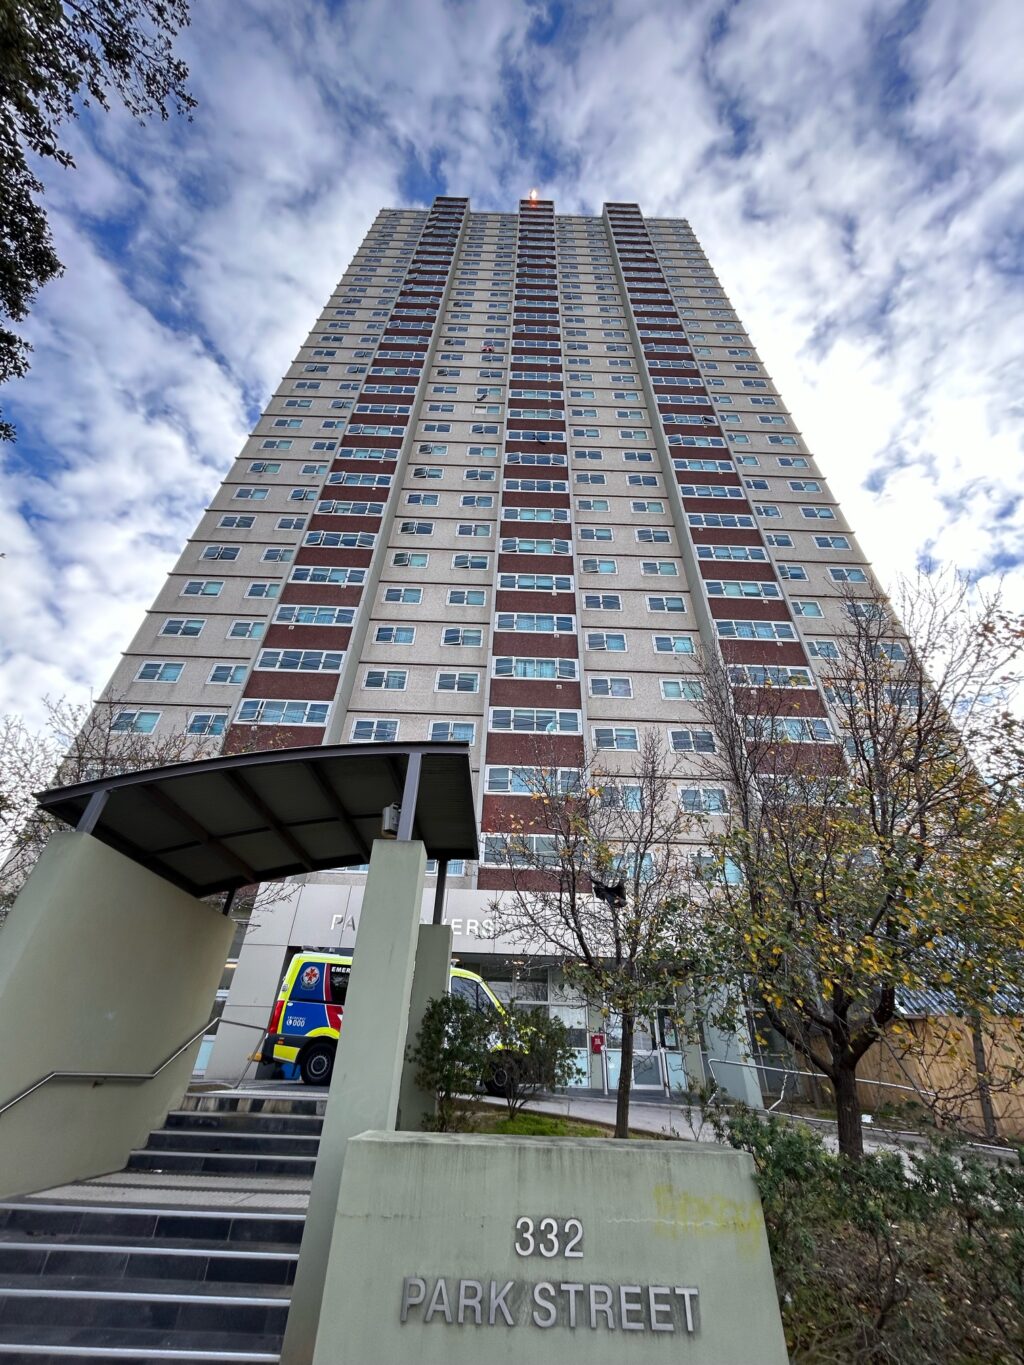 Public housing towers nominated for state heritage listing